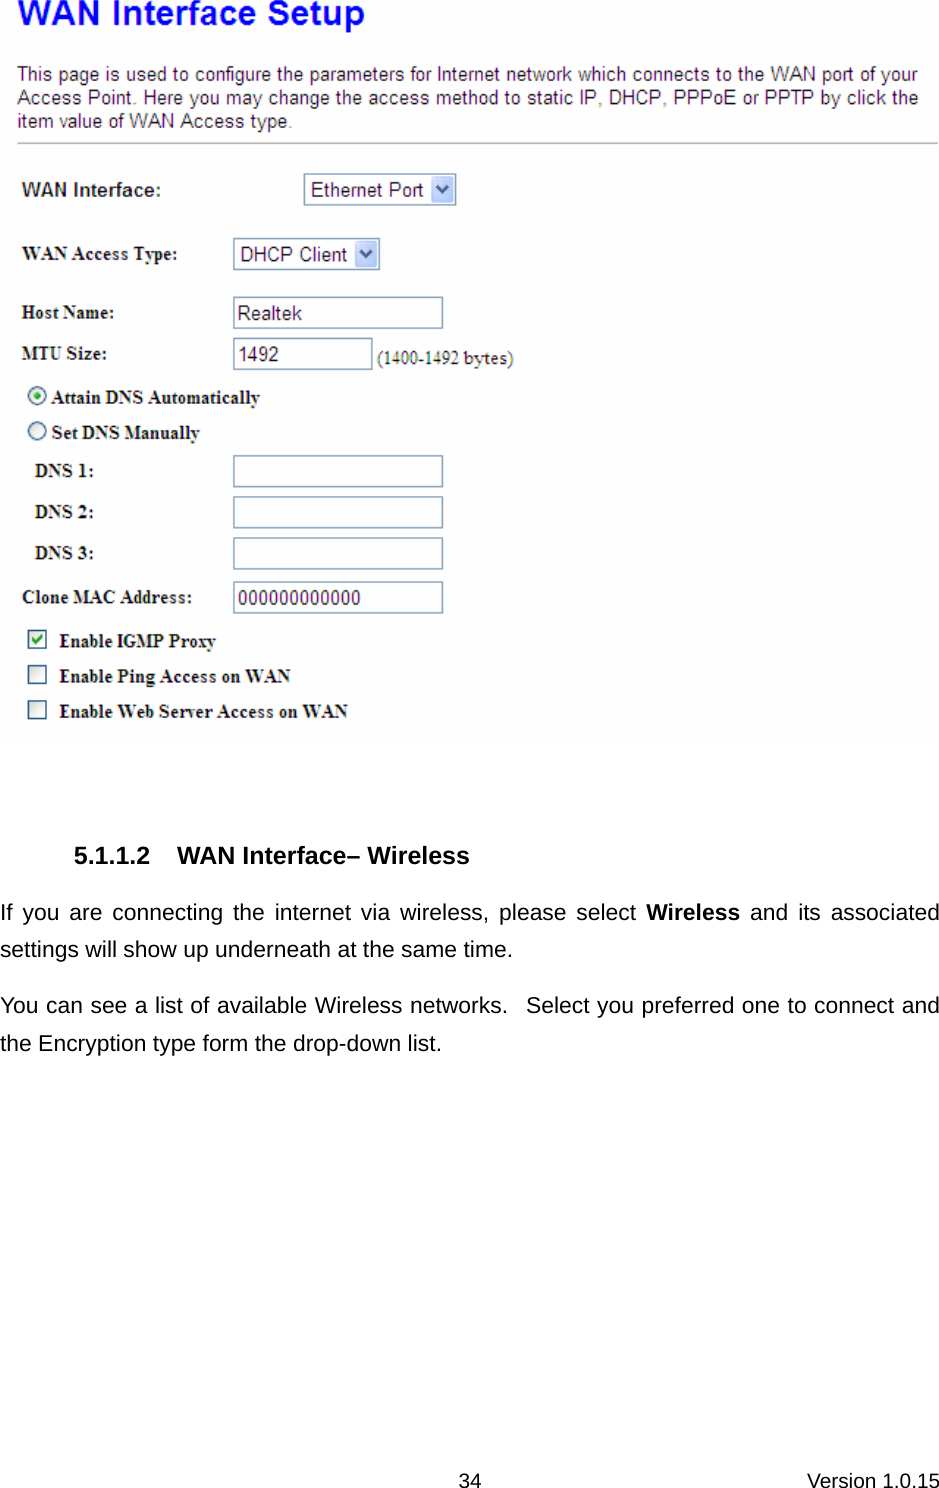 Version 1.0.15 34  5.1.1.2  WAN Interface– Wireless If you are connecting the internet via wireless, please select Wireless and its associated settings will show up underneath at the same time. You can see a list of available Wireless networks.   Select you preferred one to connect and the Encryption type form the drop-down list. 